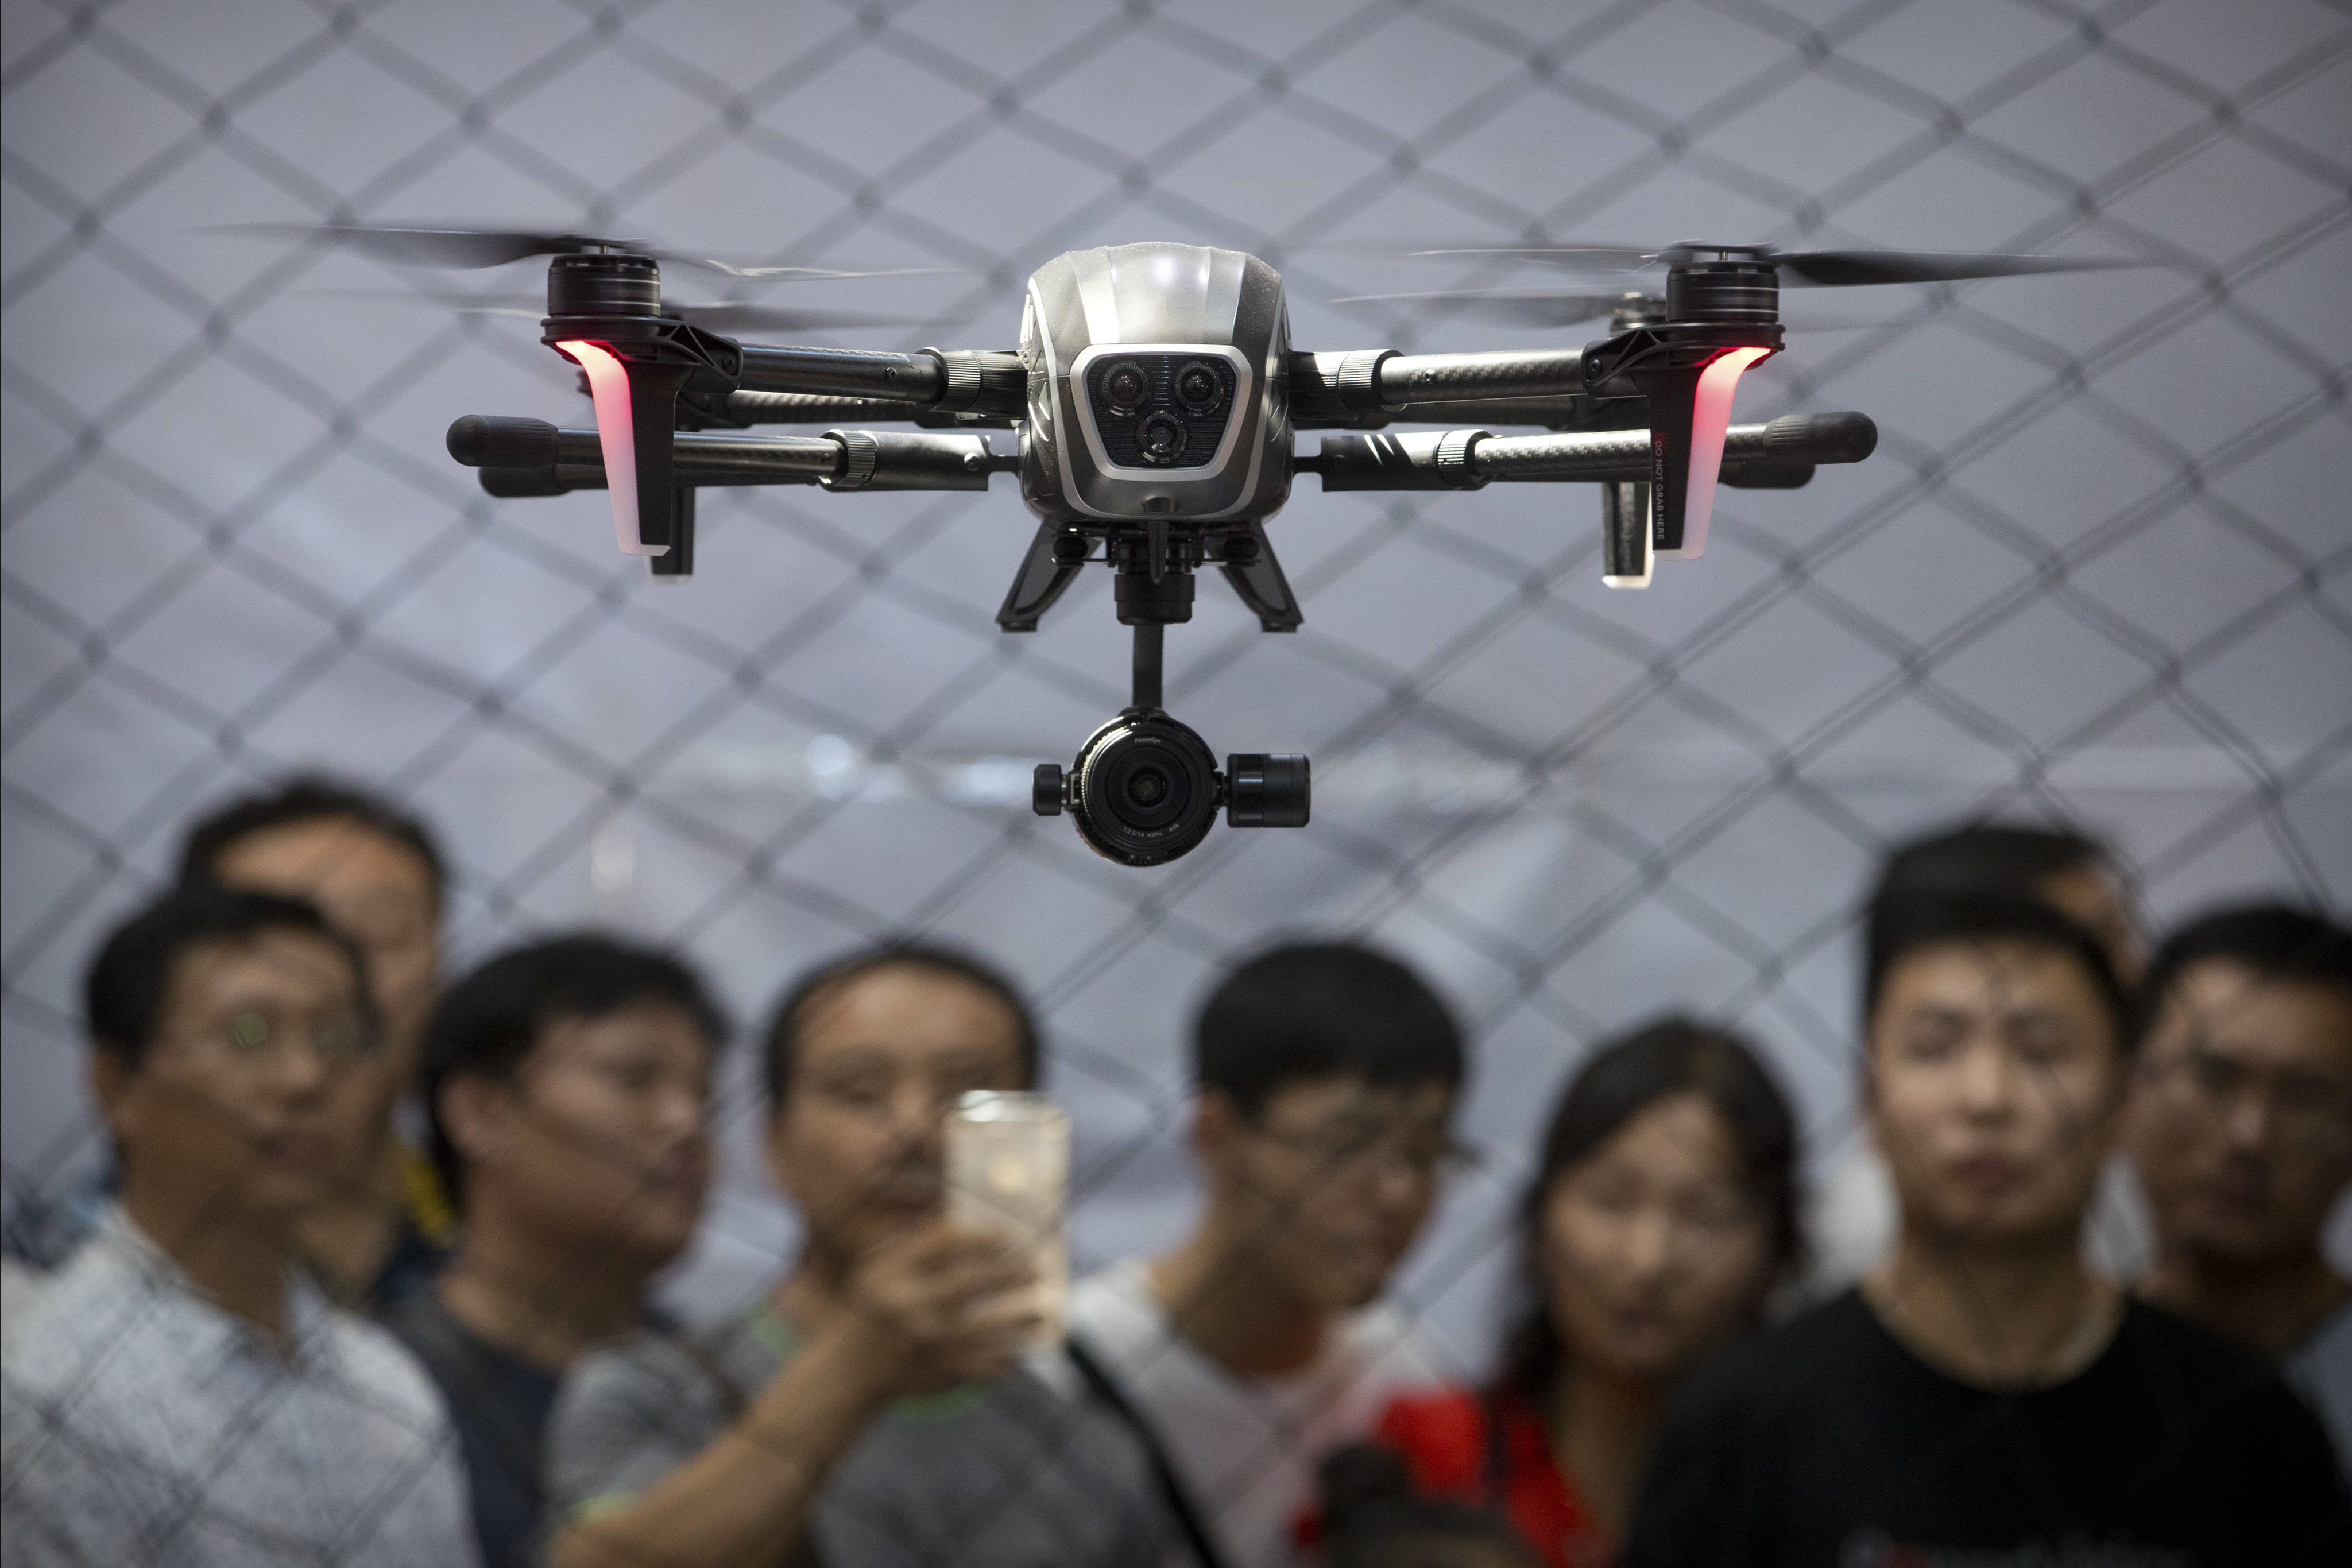 Visitors watch as a drone made by PowerVision hovers during a demonstration at the World Robot Conference in Beijing, Thursday, Aug. 24, 2017. The annual conference is a showcase of China&#39;s burgeoning robot industry ranging from companion robots to those deployed on manufacturing assembly line and entertainment. (AP Photo/Mark Schiefelbein)